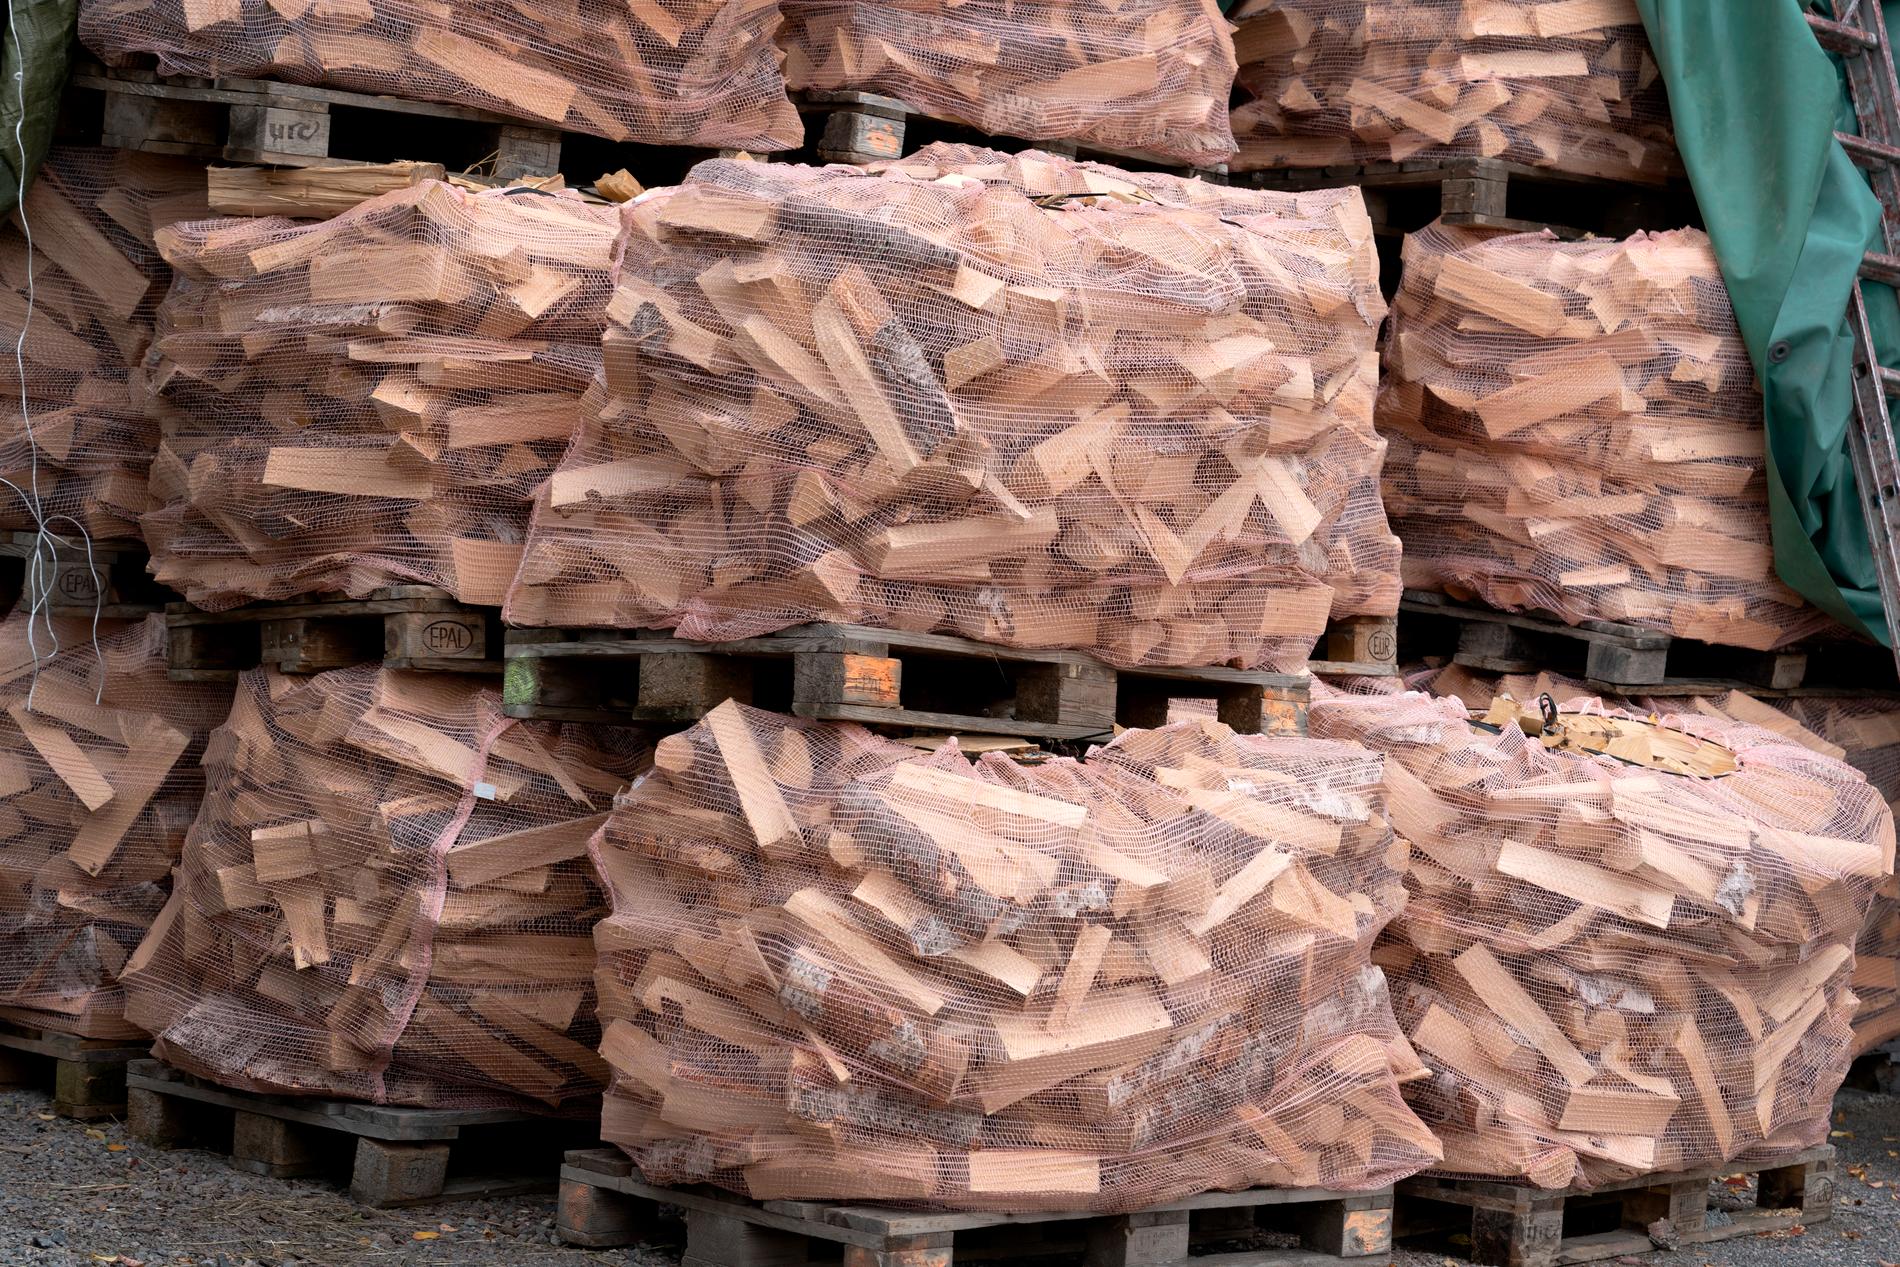 – It is good to have firewood on the market – E24